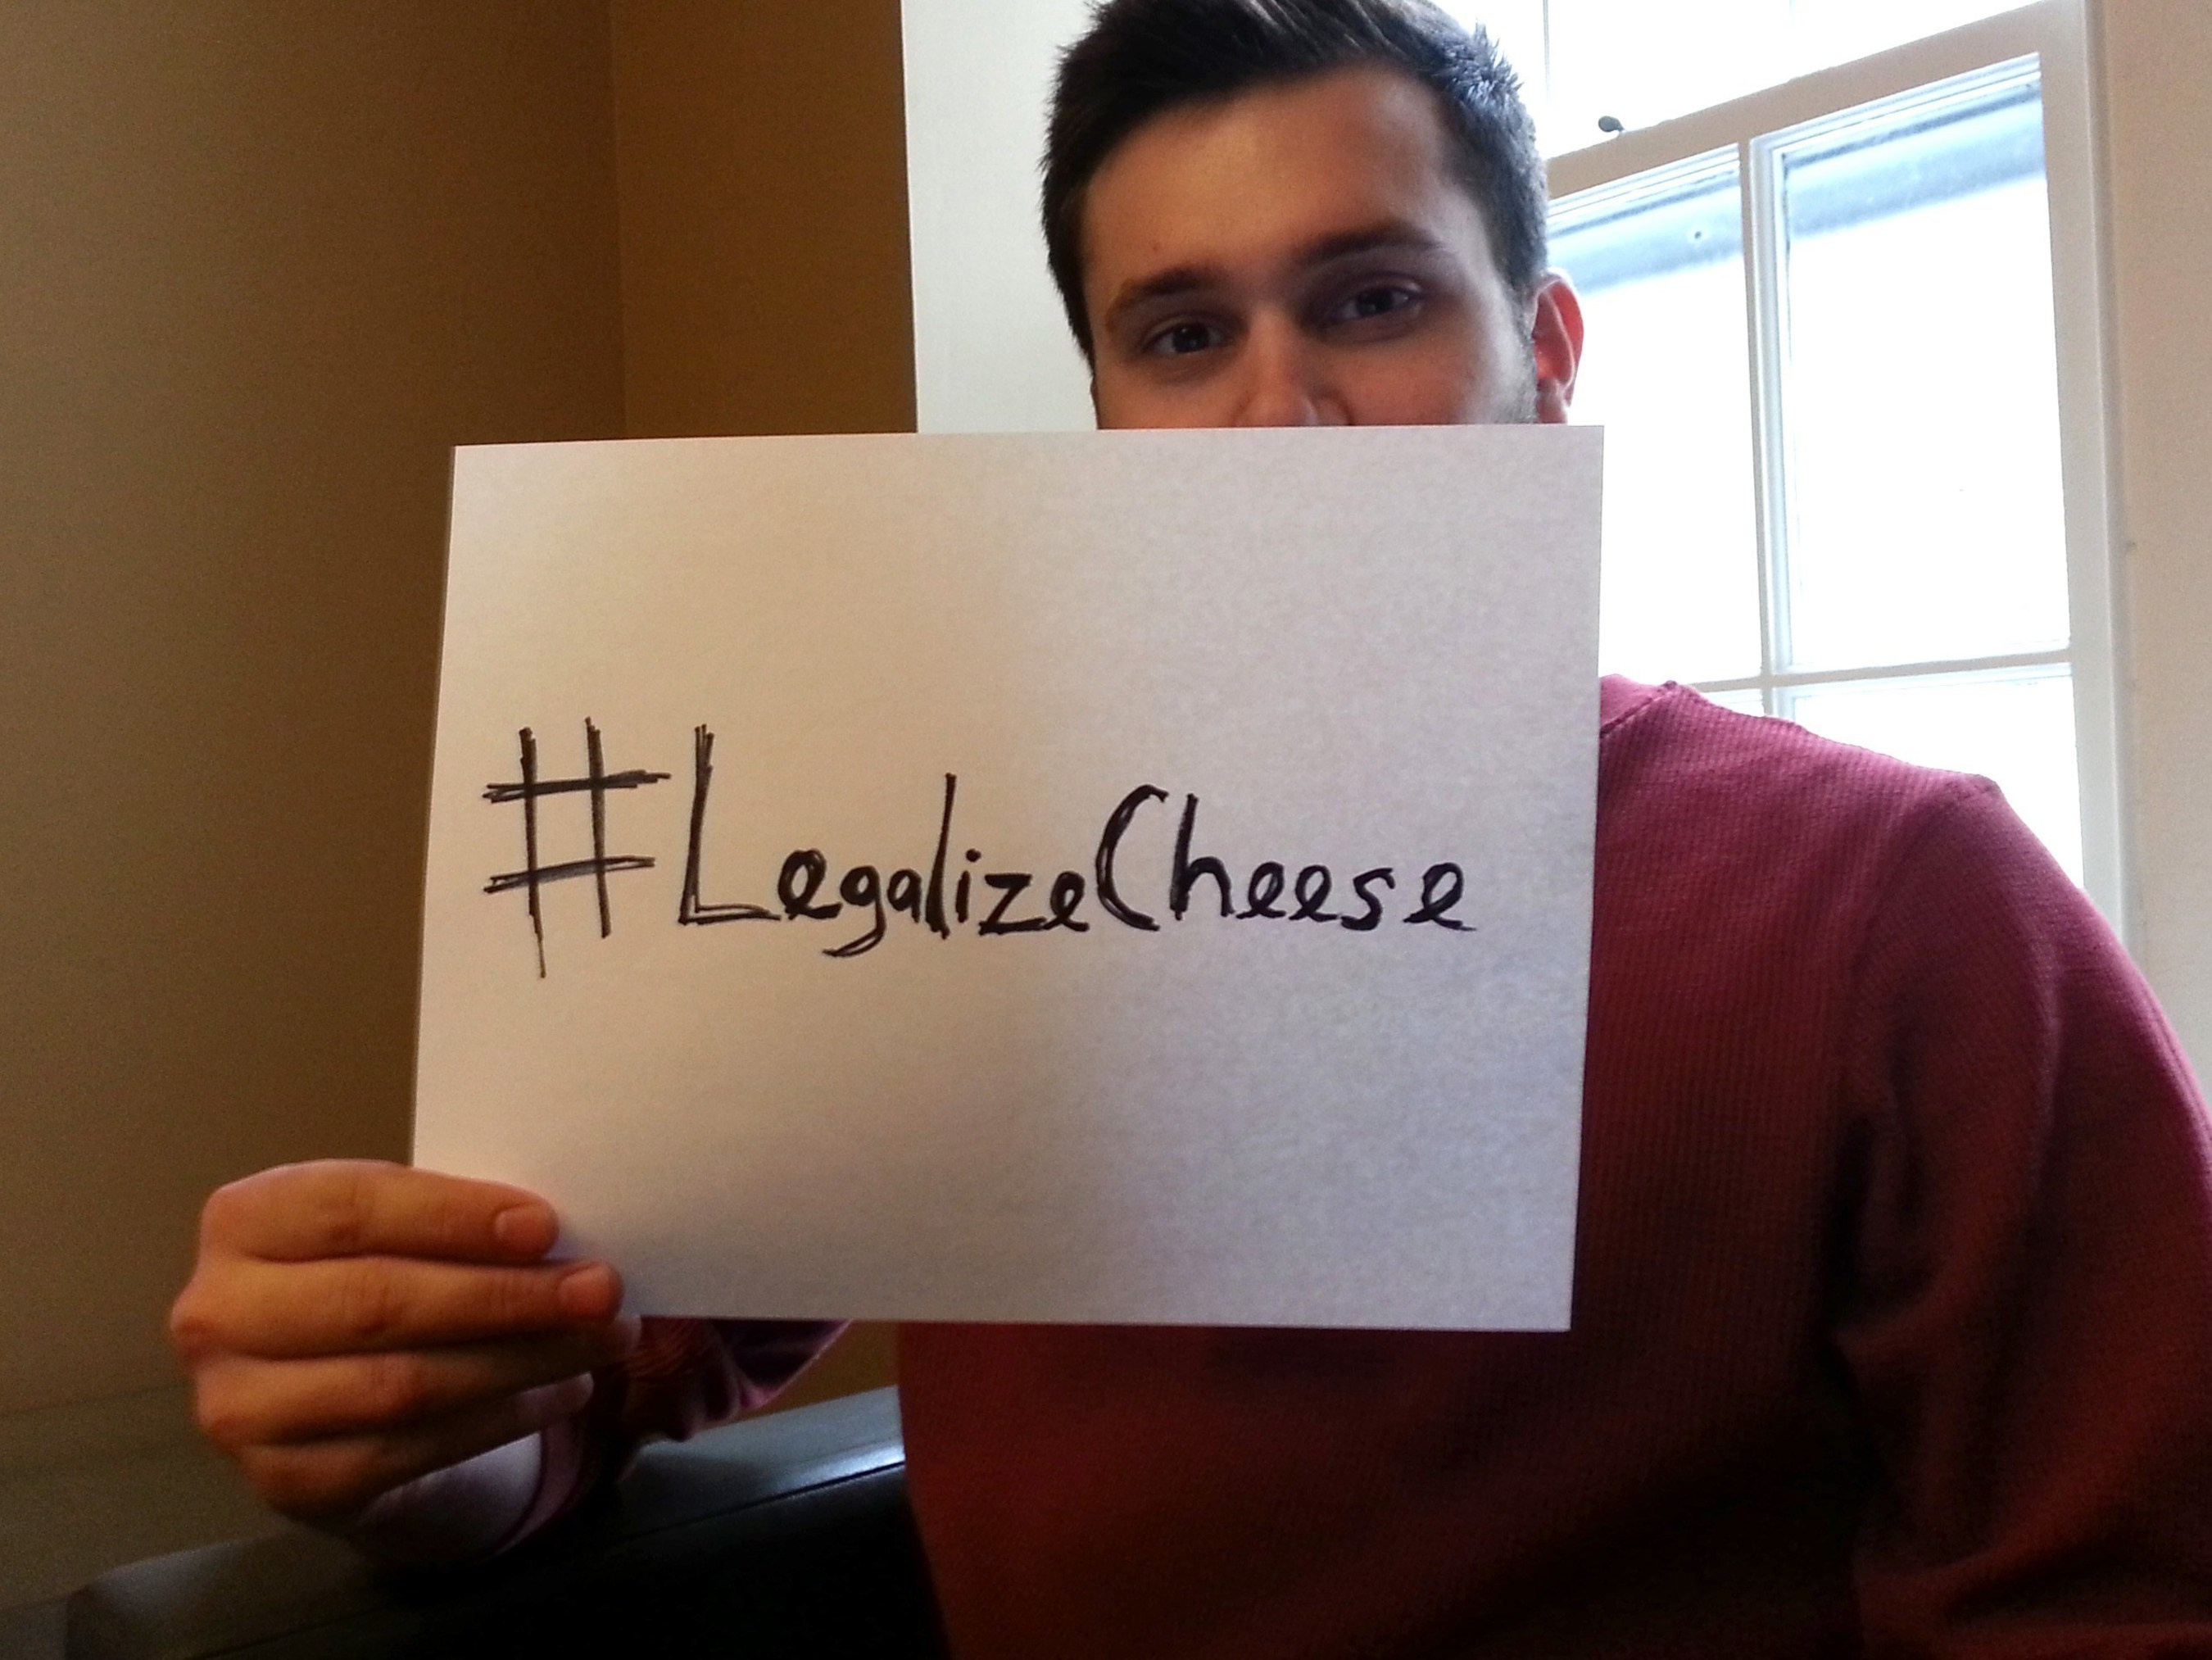 To show its devotion to real Wisconsin cheese, Toppers fanatics are encouraged to submit photos holding a #LegalizeCheese sign in exchange for a coupon for a free large 1-topping pizza. To qualify, all photos must be sent to www.facebook.com/ToppersRocks or www.twitter.com/ToppersPizza by 5:00 p.m. on Saturday, Jan. 17, 2015; one coupon per person.